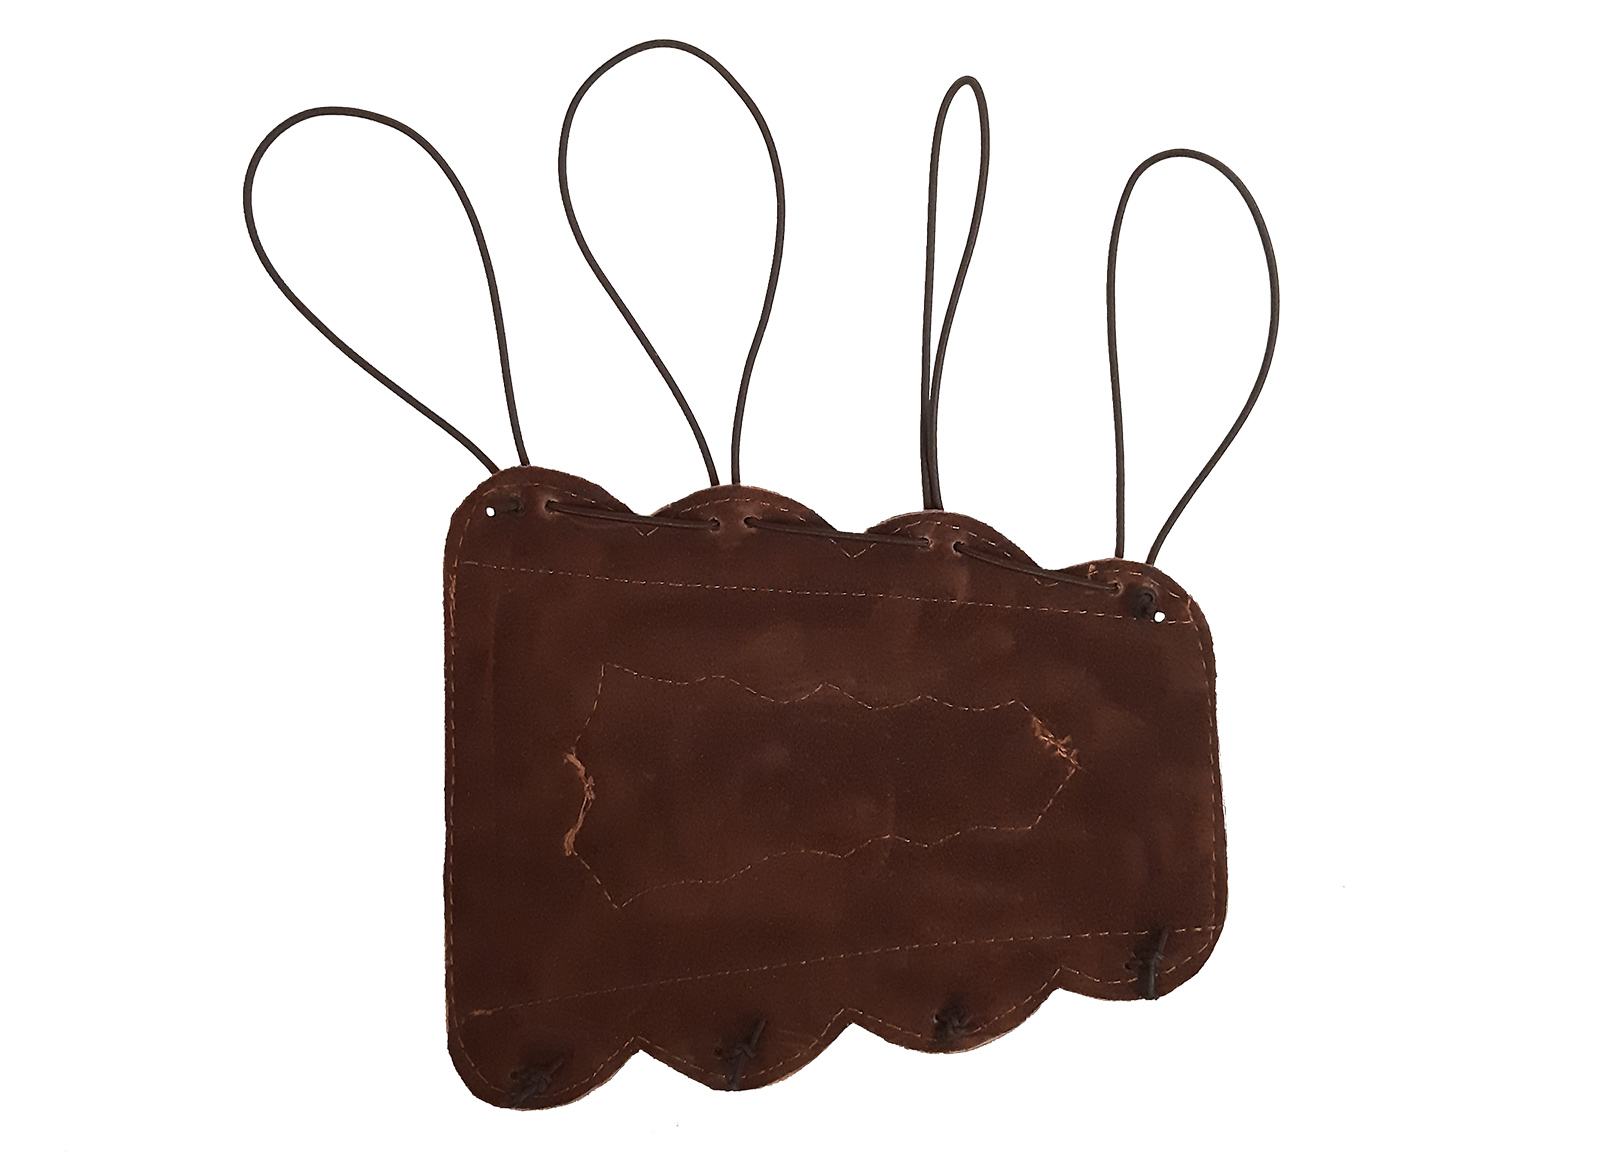 ALPEN ARCHERY TRADITIONAL ARMGUARD IN BROWN SUEDE LEATHER